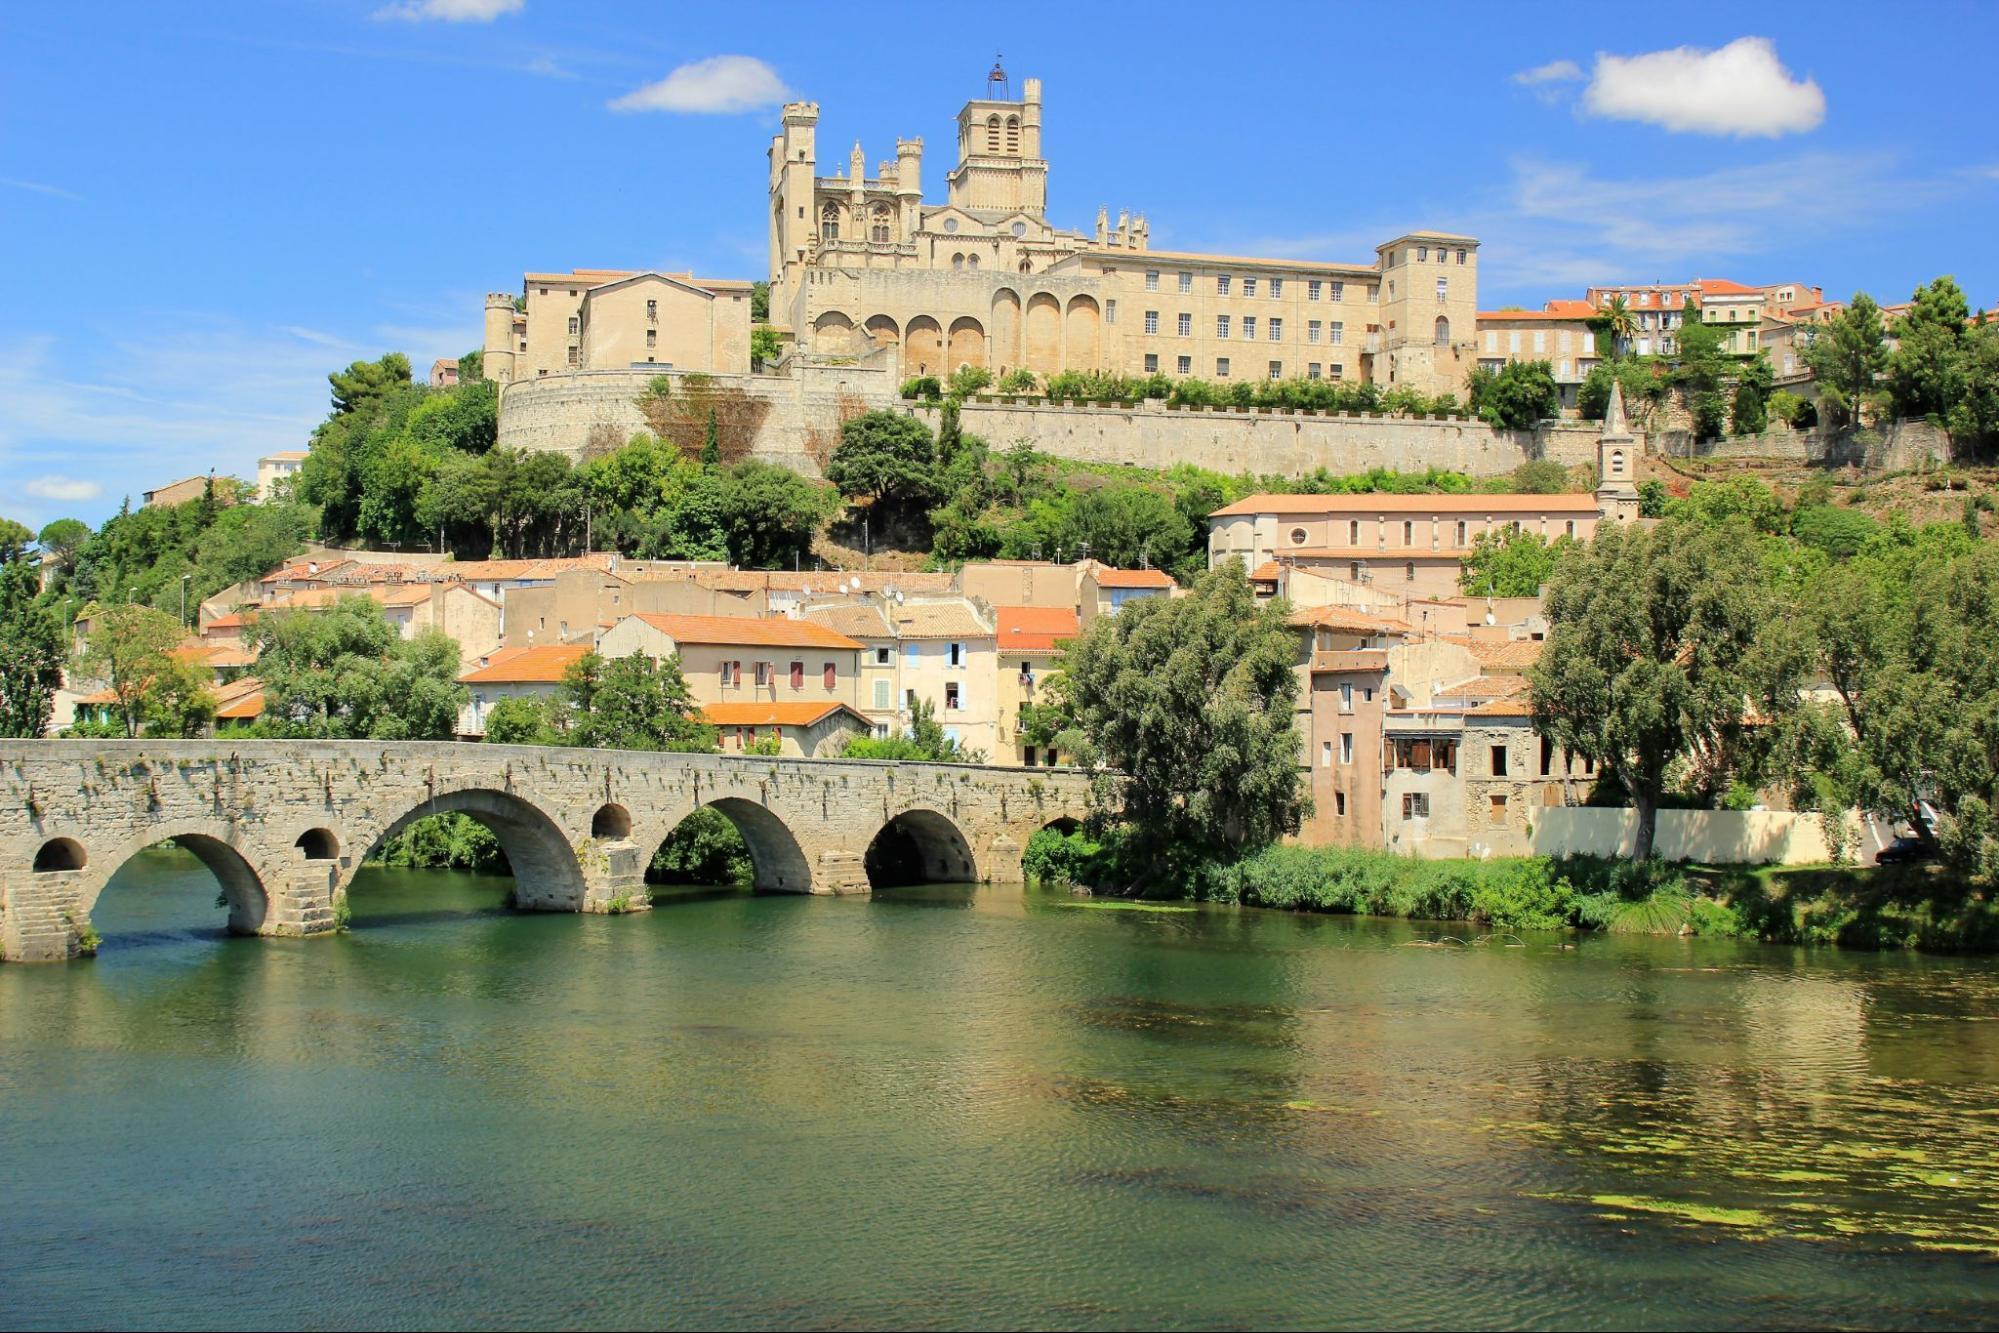 The old bridge near the castle in Beziers, France